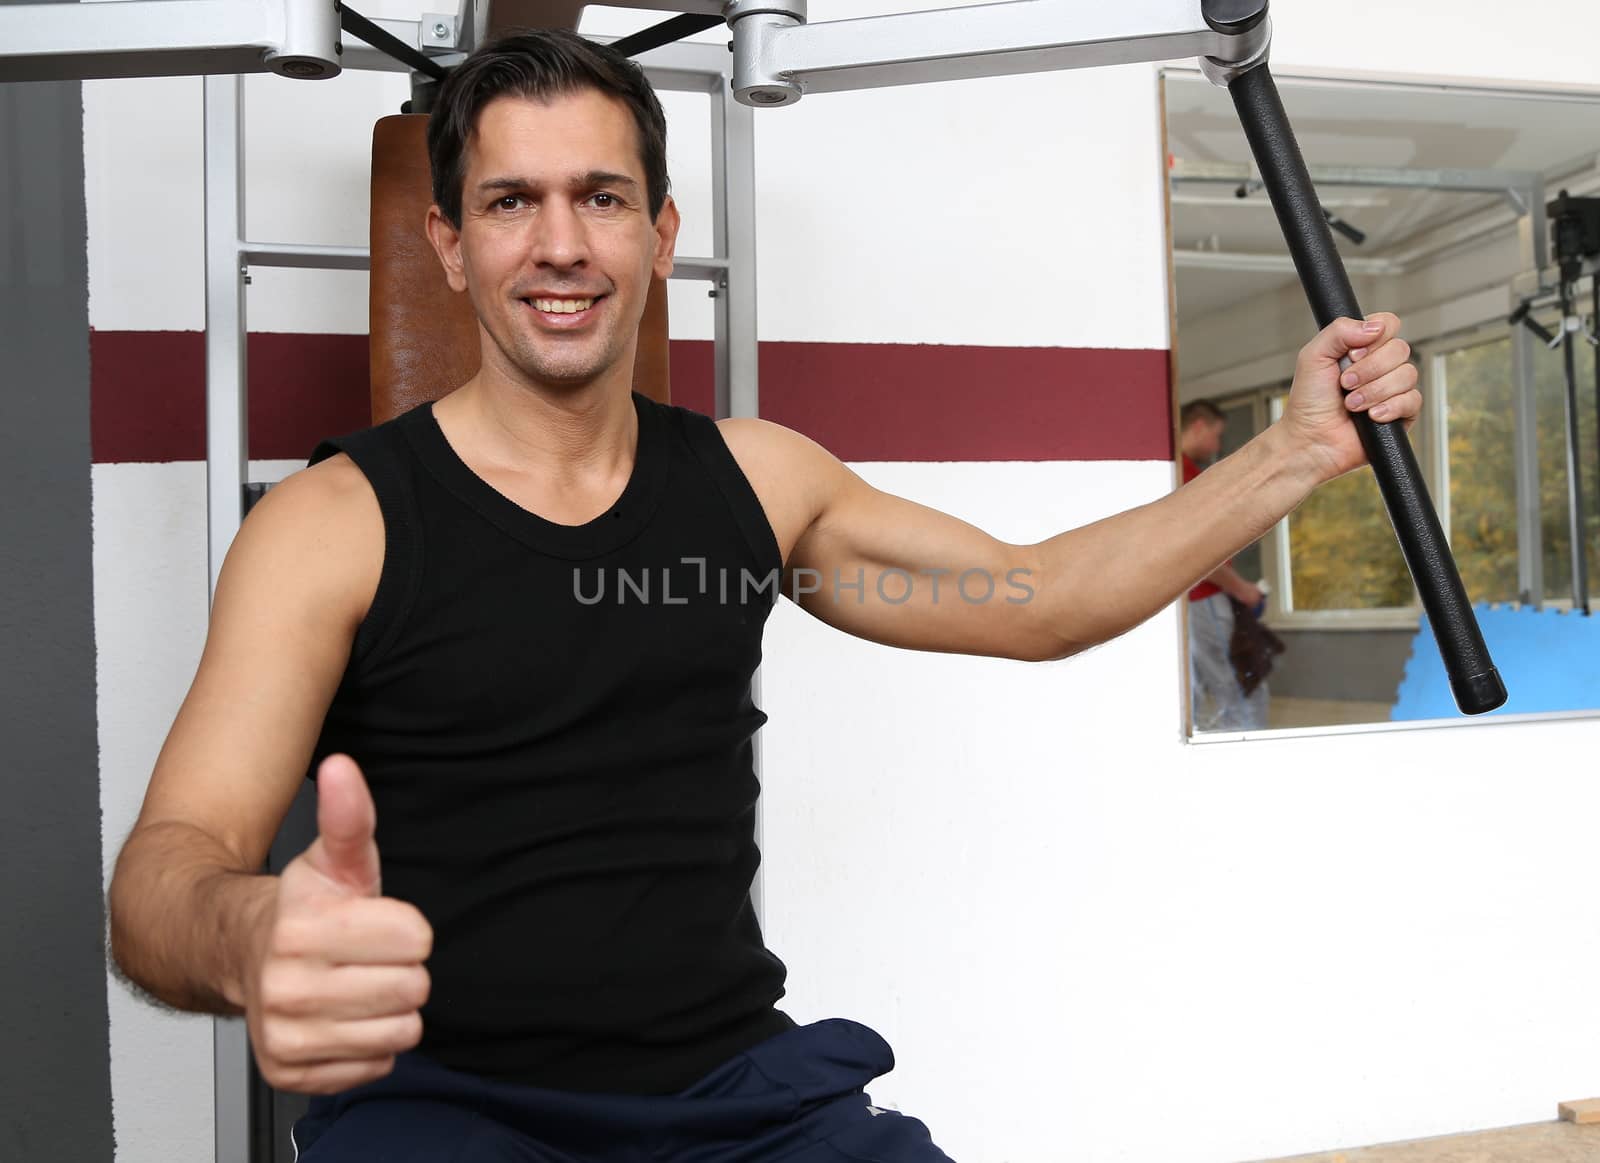 Athletic man exercising and lifting weights in a fitness center showing thumbs up